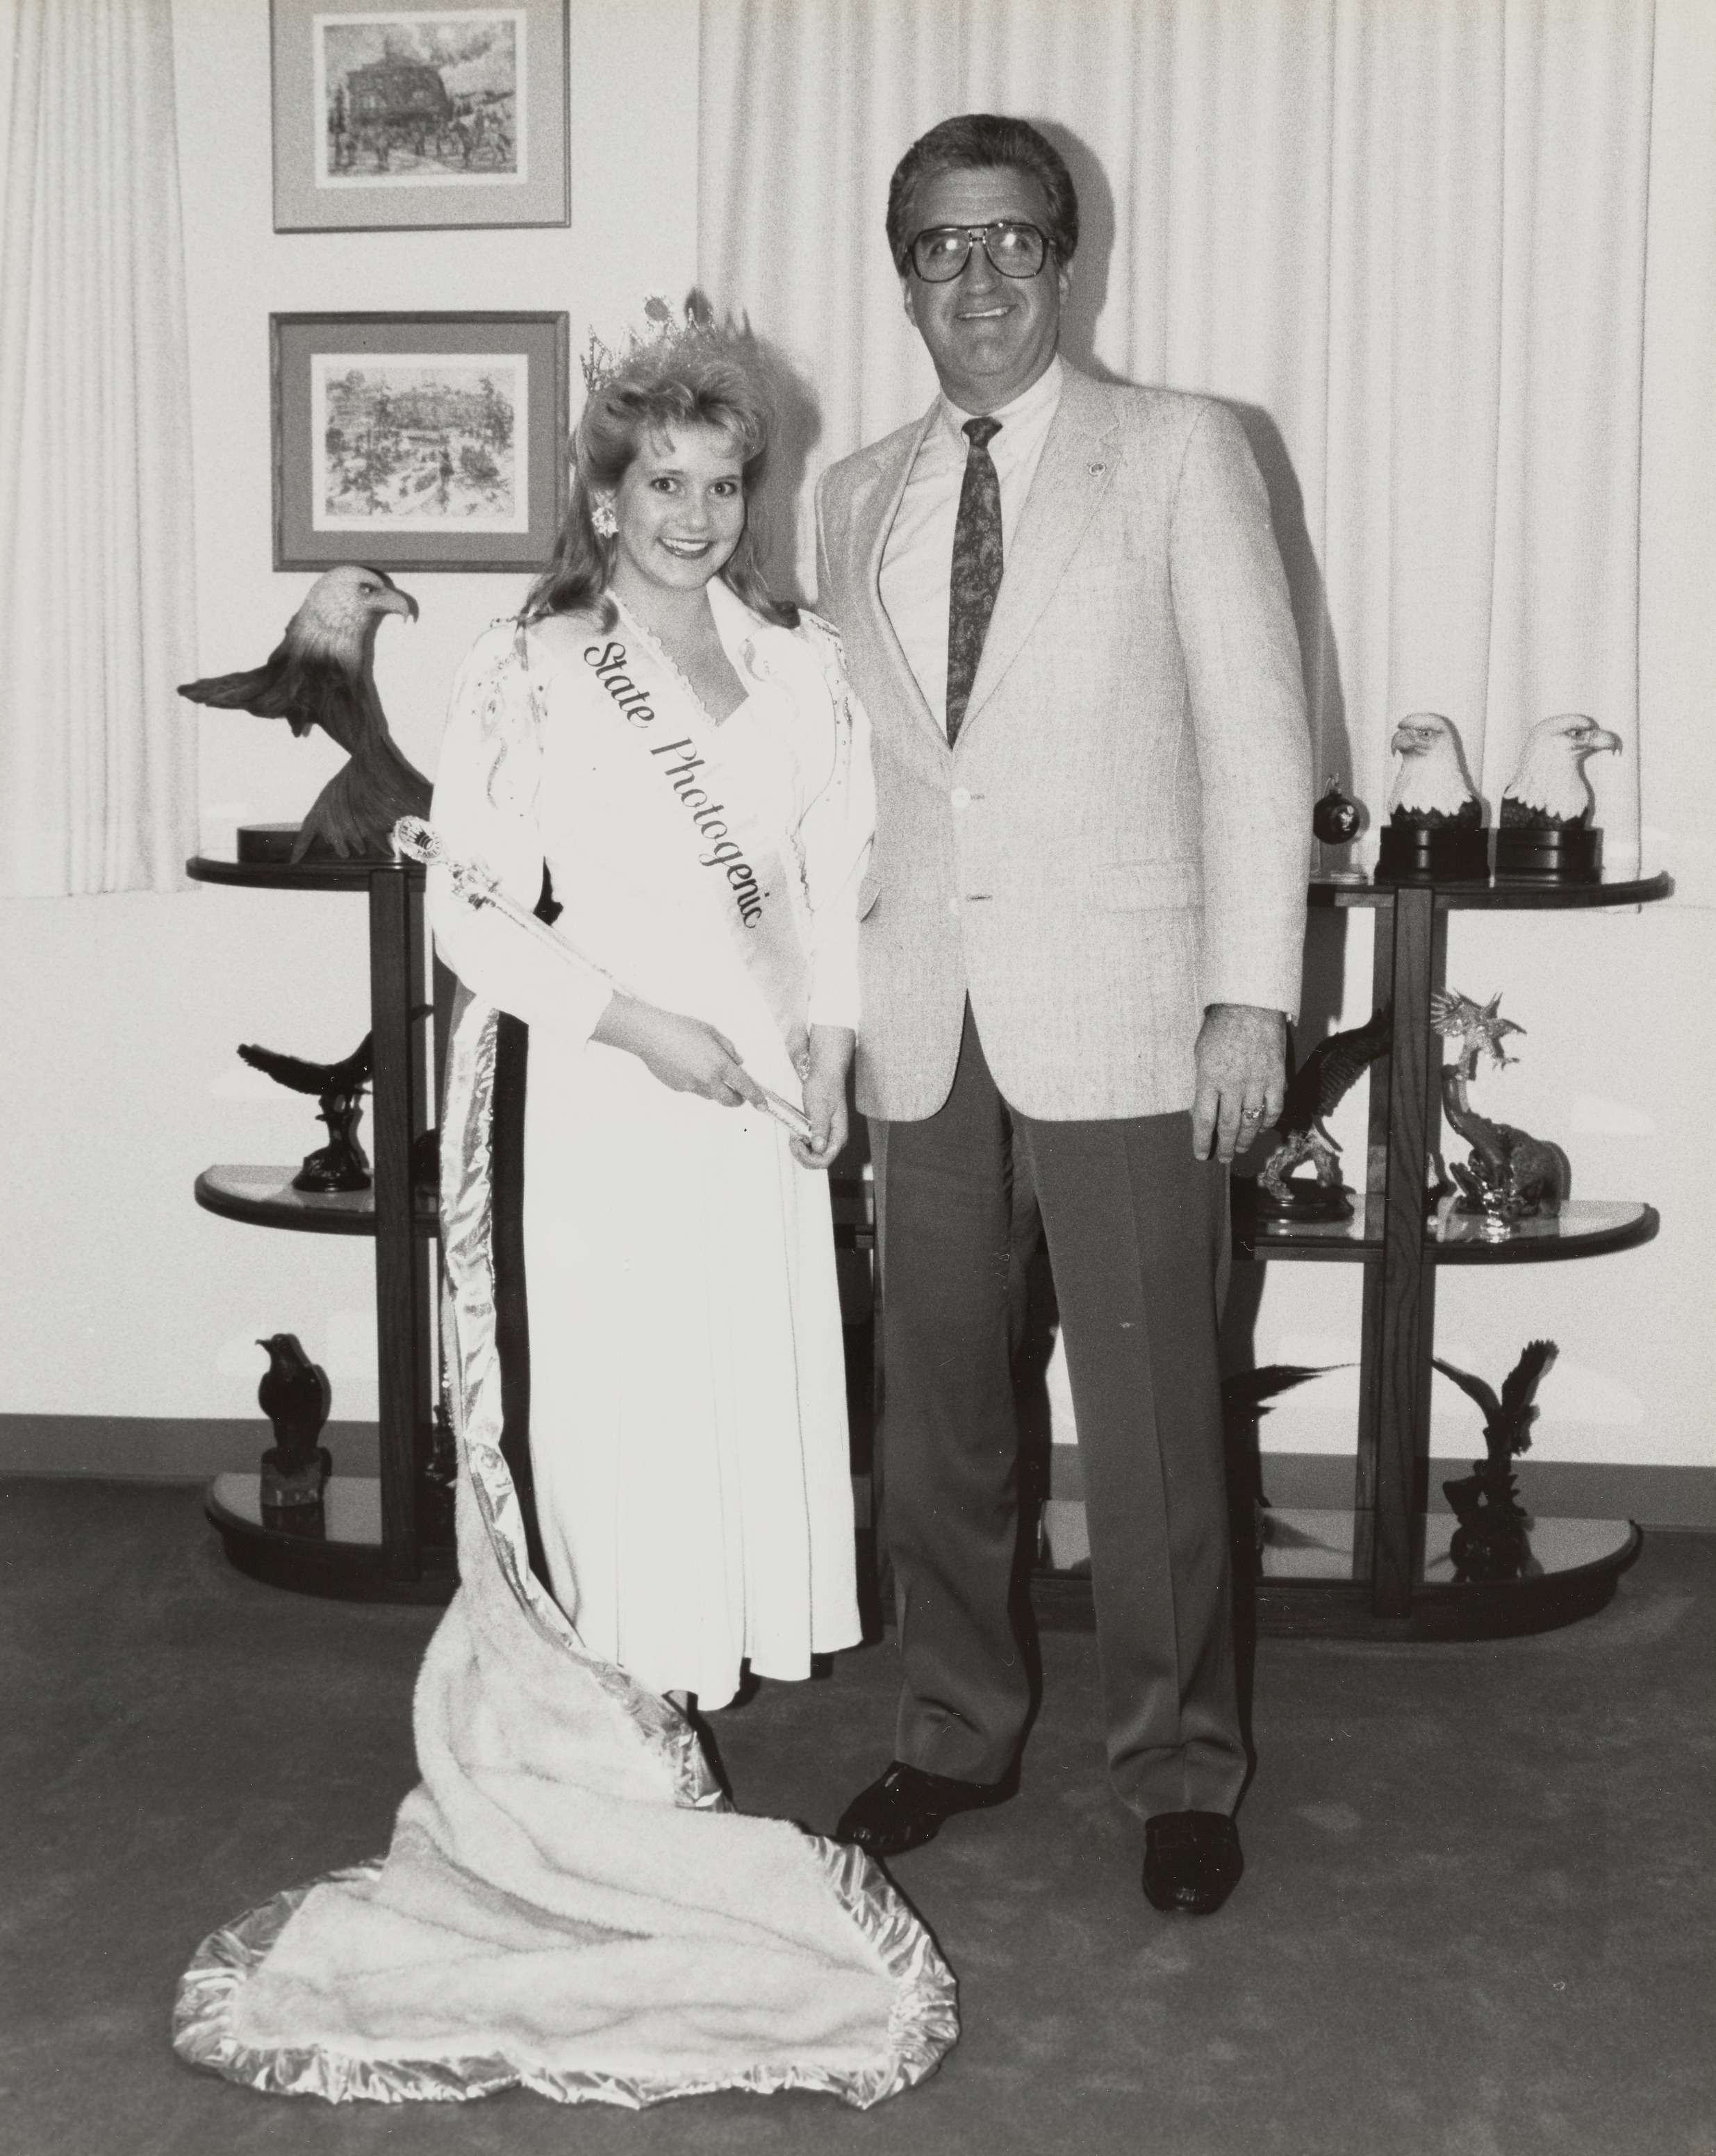 Photograph of Ron Lurie with J & J Pageant Contestant, April 17, 1990